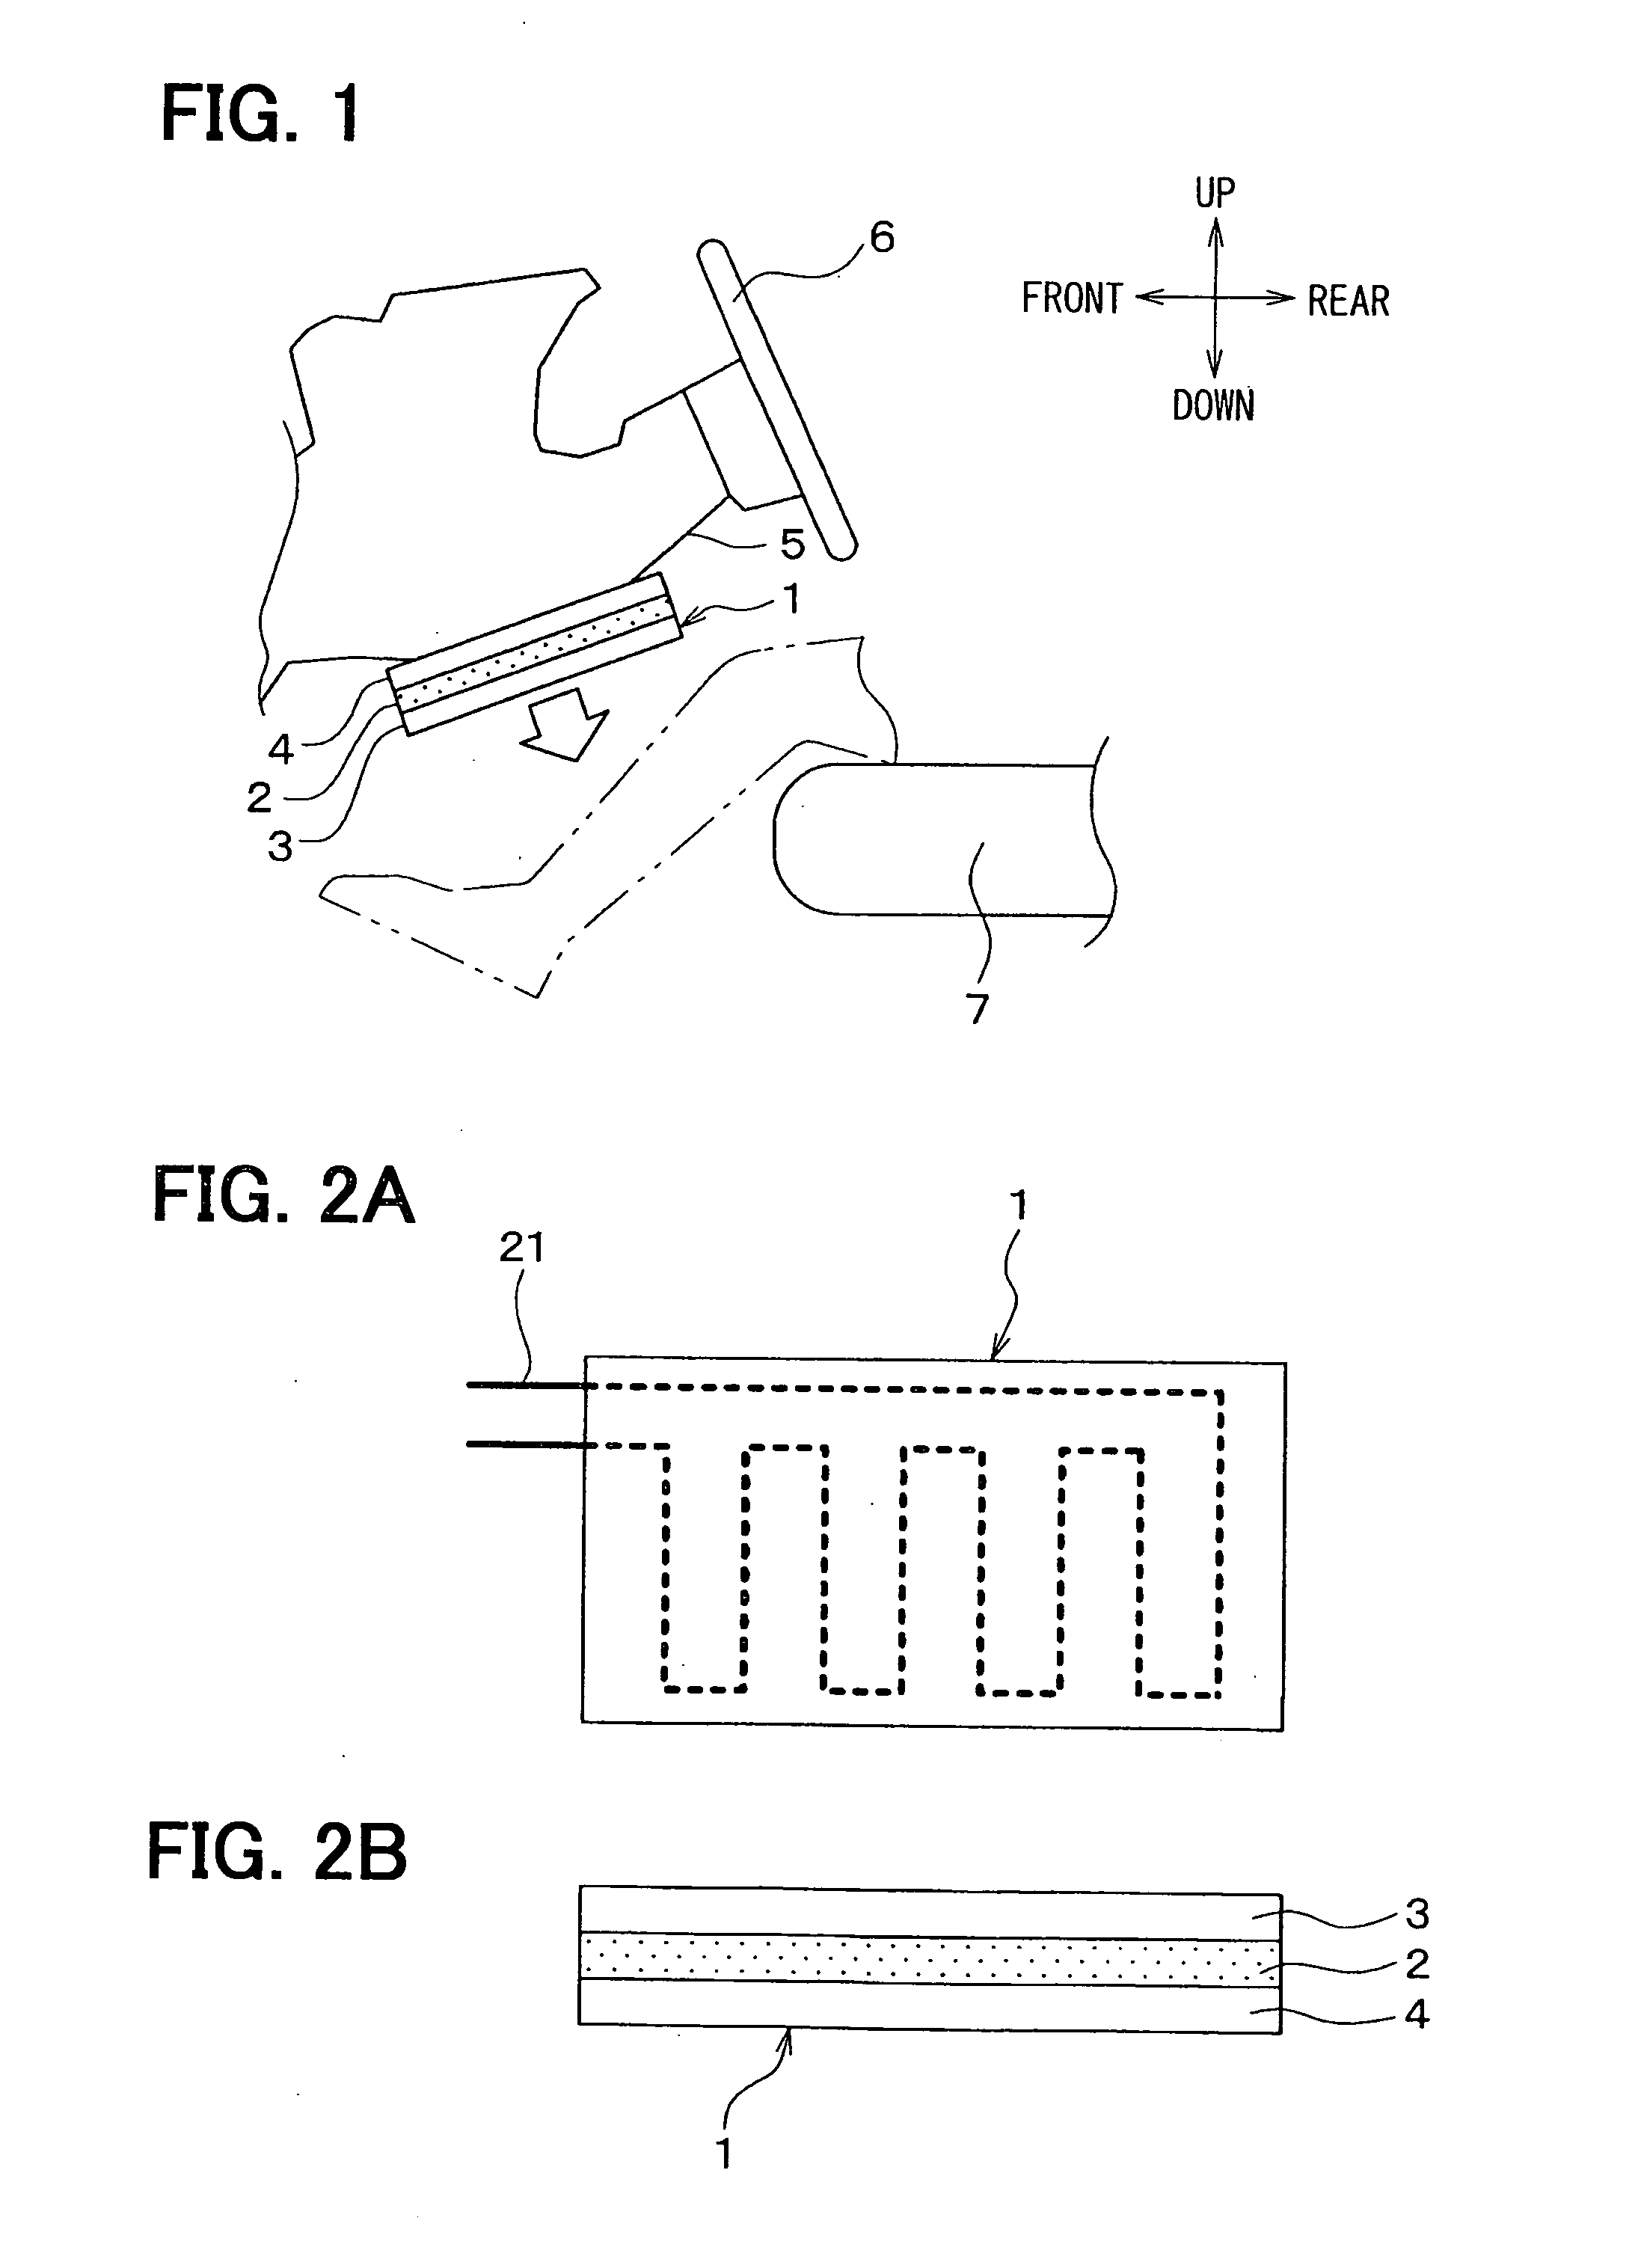 Radiation heating system for vehicle